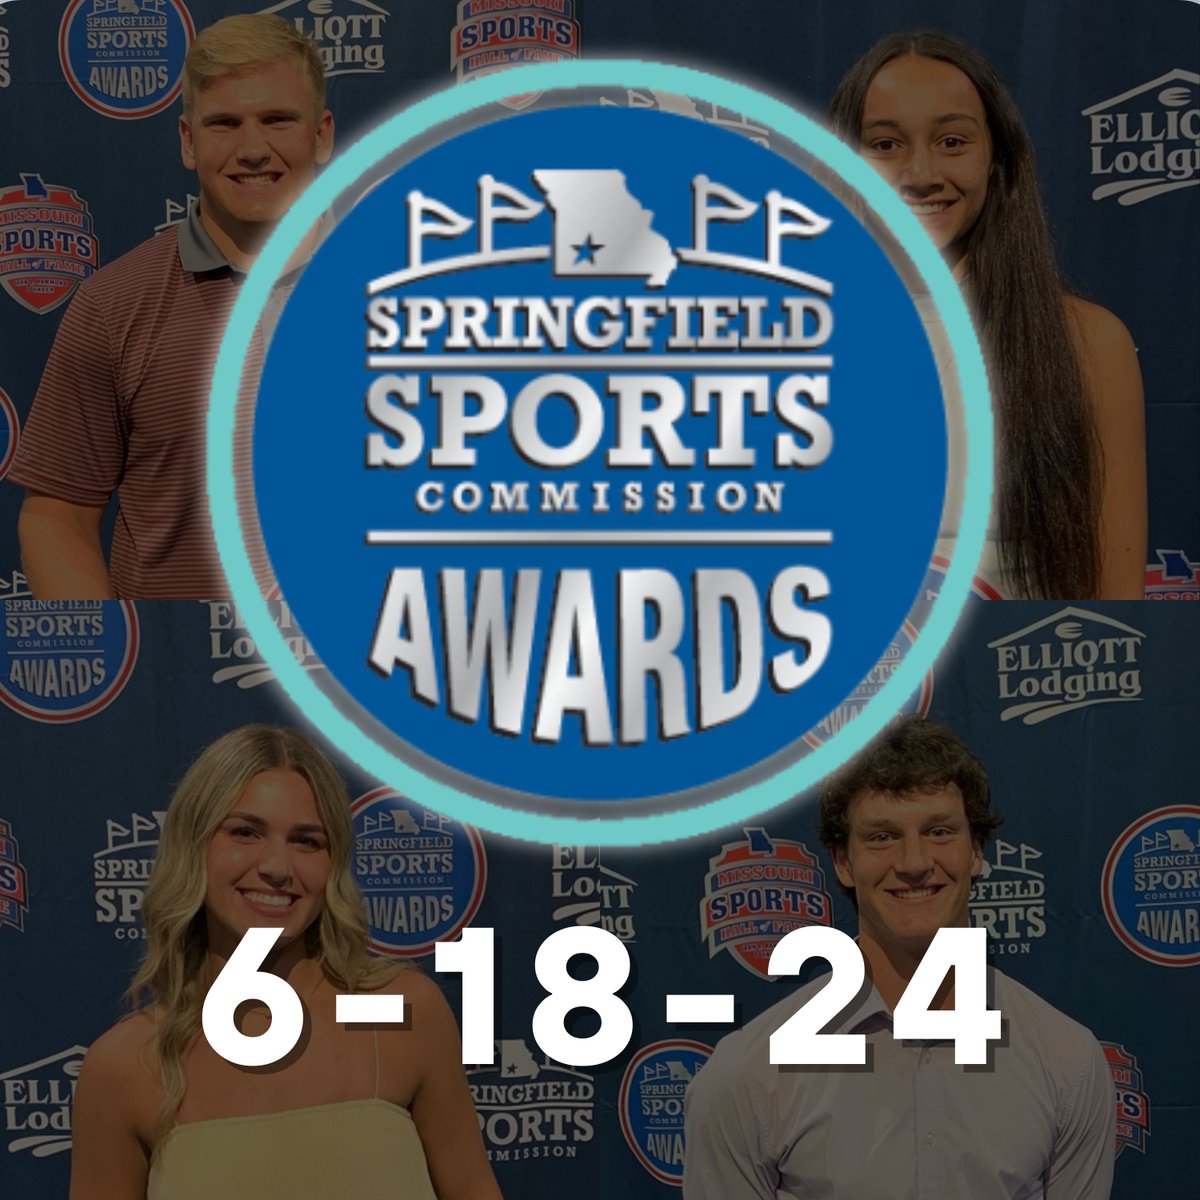 📅SAVE THE DATE📅 The annual Springfield Sports Commission Awards return on June 18th. Join us for a night of recognizing the best of the best in high school sports across Southwest Missouri! Stay tuned for finalists who will be announced soon...